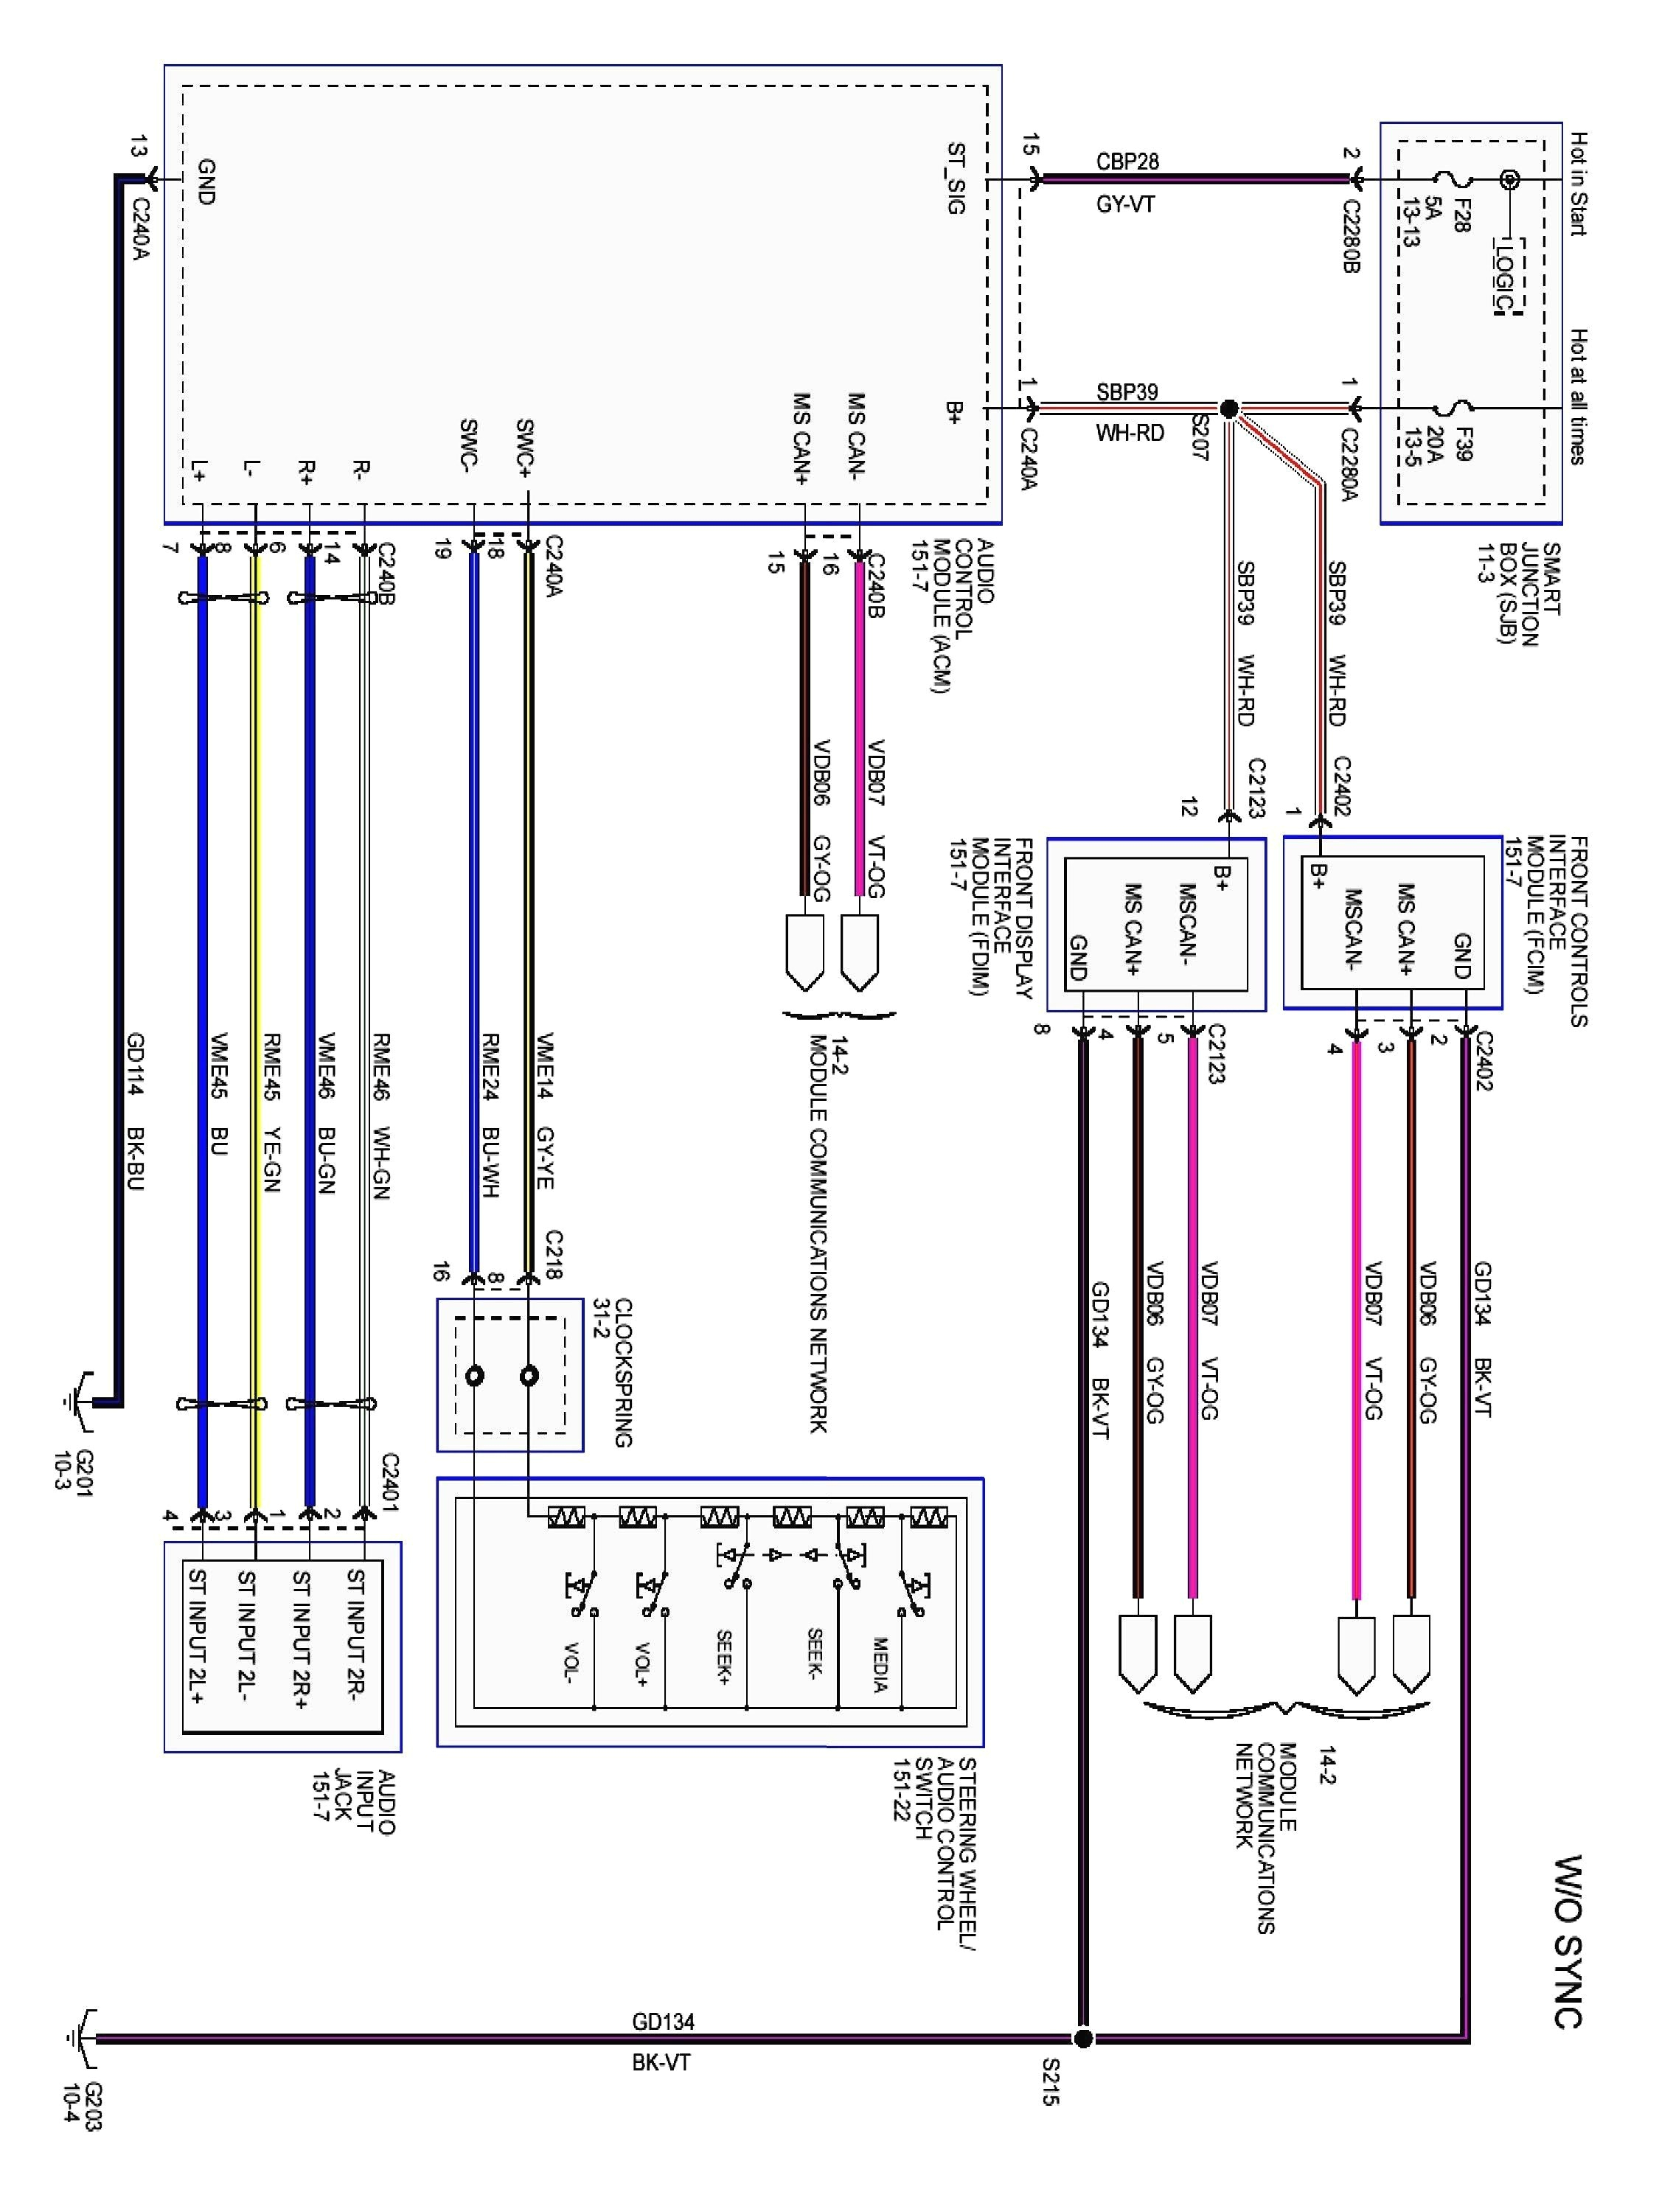 2000 ford focus stereo wiring diagram wiring diagram for you 2003 ford focus radio wiring harness